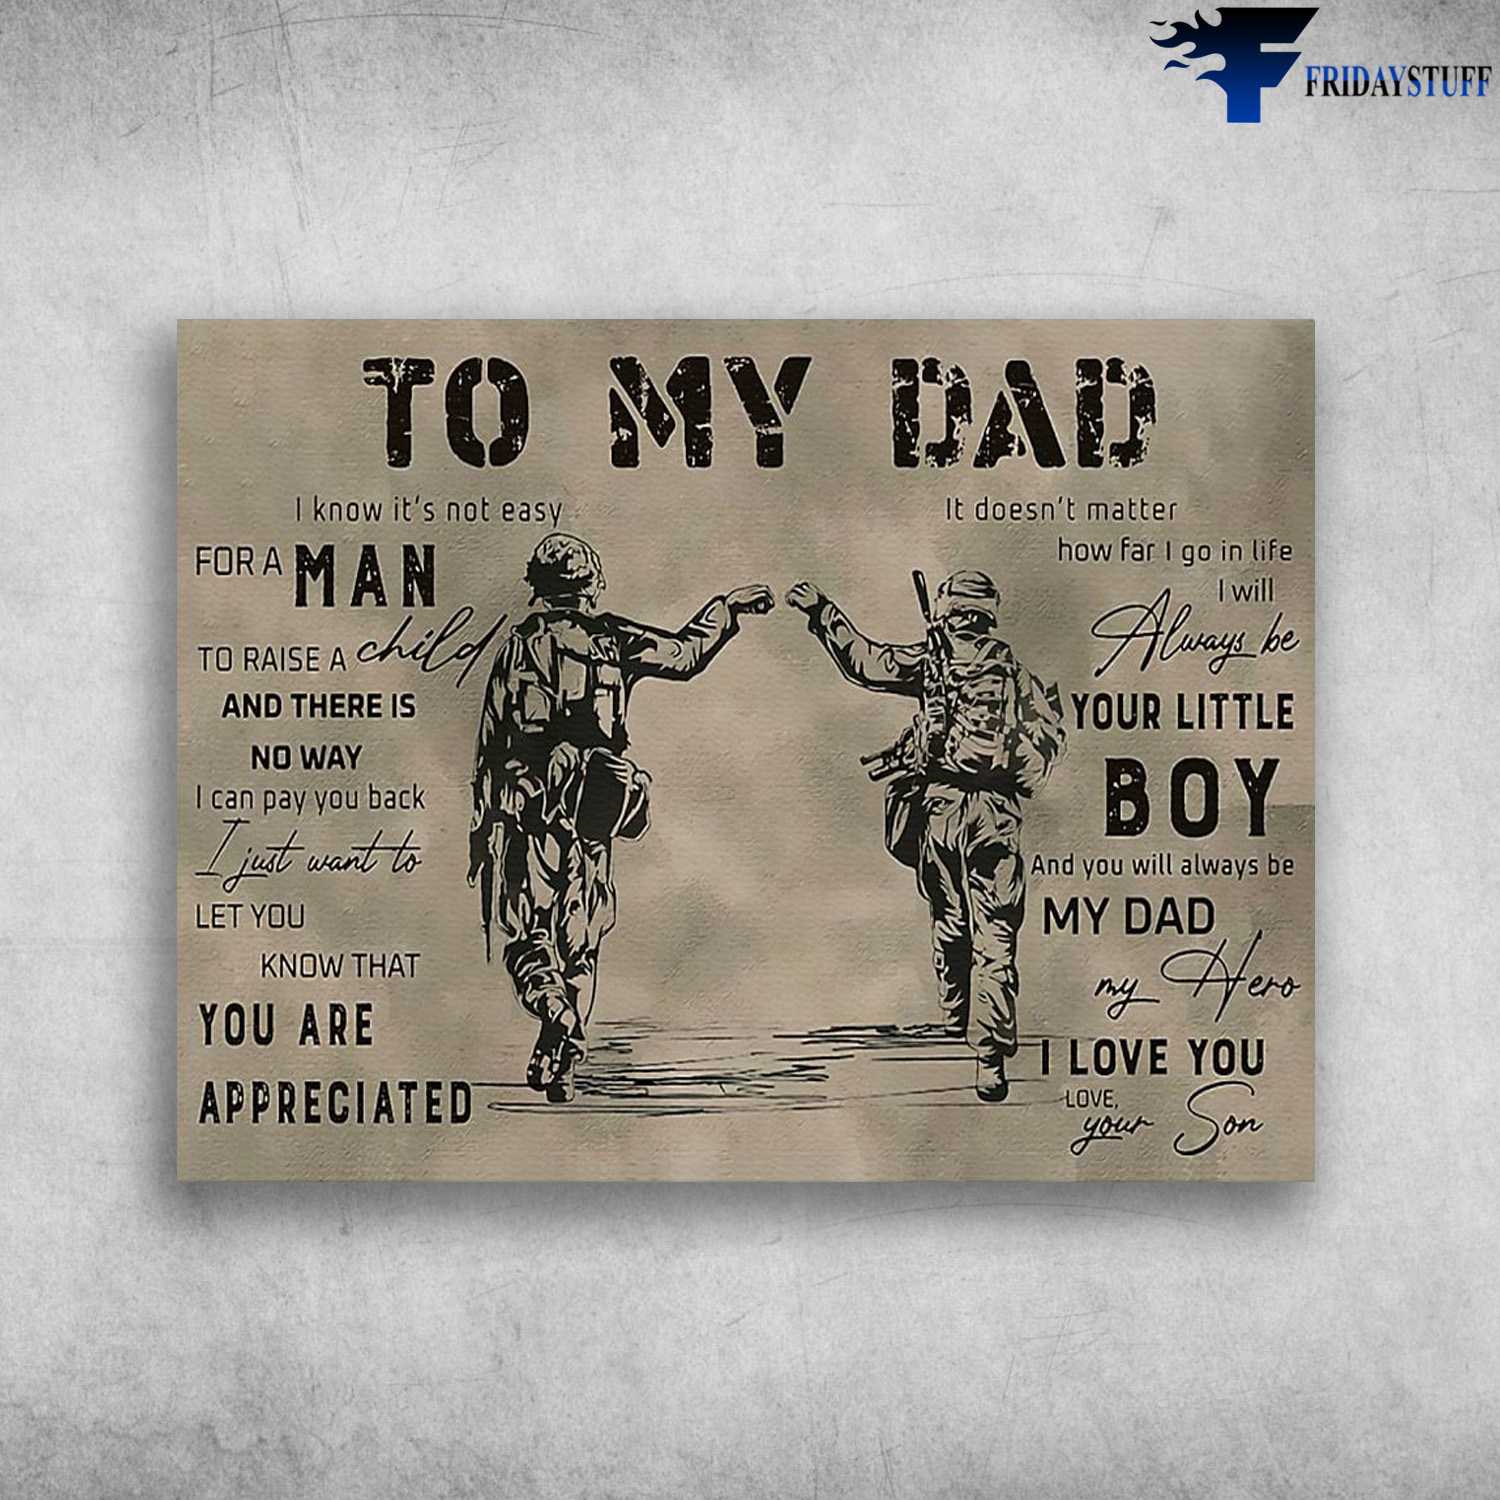 Soldier Poster, Dad And Son, To My Dad, I Know It's Not Easy For A Man, To Raise A Child, And There Is No Way, I Can Pay You Back, I Just Want To Let You Know That, You Are Appreciated